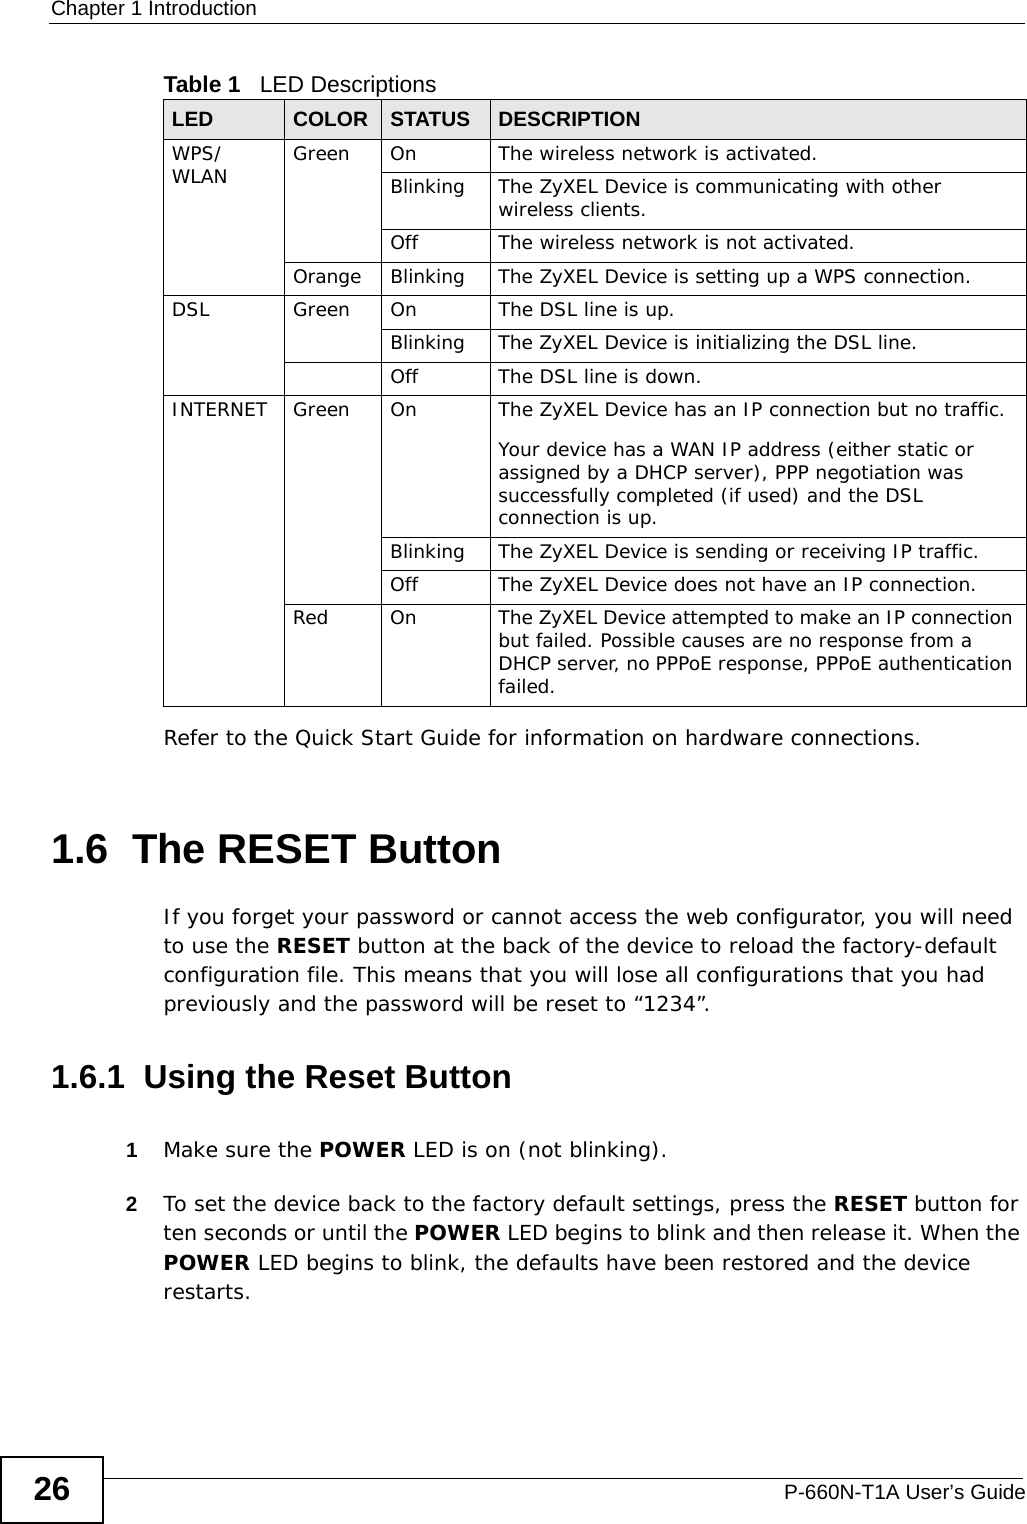 Chapter 1 IntroductionP-660N-T1A User’s Guide26Refer to the Quick Start Guide for information on hardware connections. 1.6  The RESET ButtonIf you forget your password or cannot access the web configurator, you will need to use the RESET button at the back of the device to reload the factory-default configuration file. This means that you will lose all configurations that you had previously and the password will be reset to “1234”. 1.6.1  Using the Reset Button1Make sure the POWER LED is on (not blinking).2To set the device back to the factory default settings, press the RESET button for ten seconds or until the POWER LED begins to blink and then release it. When the POWER LED begins to blink, the defaults have been restored and the device restarts.WPS/WLAN Green On The wireless network is activated.Blinking The ZyXEL Device is communicating with other wireless clients.Off The wireless network is not activated.Orange Blinking The ZyXEL Device is setting up a WPS connection.DSL Green On The DSL line is up.Blinking The ZyXEL Device is initializing the DSL line.Off The DSL line is down.INTERNET Green On The ZyXEL Device has an IP connection but no traffic.Your device has a WAN IP address (either static or assigned by a DHCP server), PPP negotiation was successfully completed (if used) and the DSL connection is up.Blinking The ZyXEL Device is sending or receiving IP traffic.Off The ZyXEL Device does not have an IP connection.Red On The ZyXEL Device attempted to make an IP connection but failed. Possible causes are no response from a DHCP server, no PPPoE response, PPPoE authentication failed.Table 1   LED DescriptionsLED COLOR STATUS DESCRIPTION